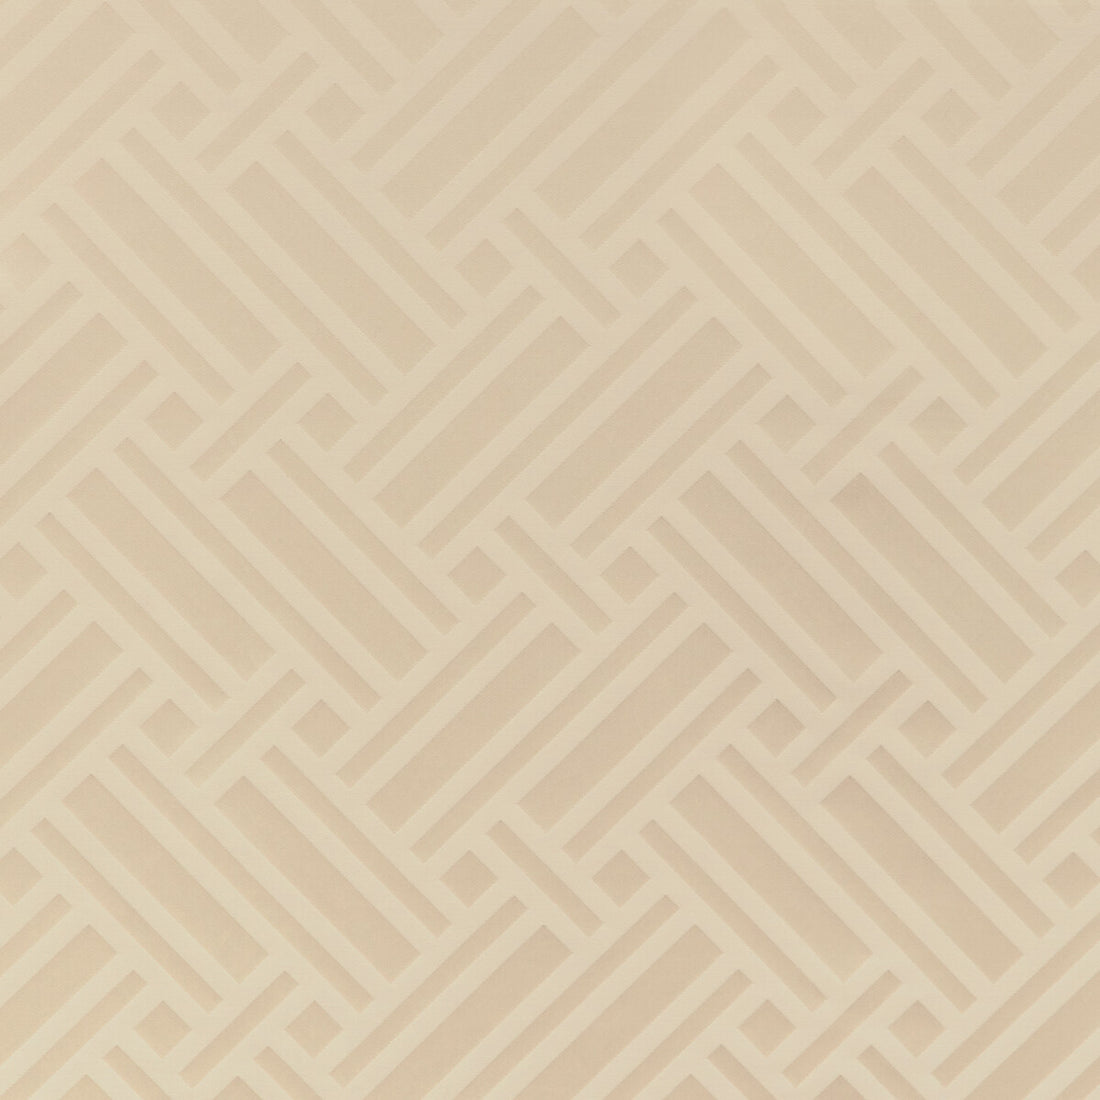 Martel Weave fabric in cream color - pattern 8023144.16.0 - by Brunschwig &amp; Fils in the Vienne Silks collection